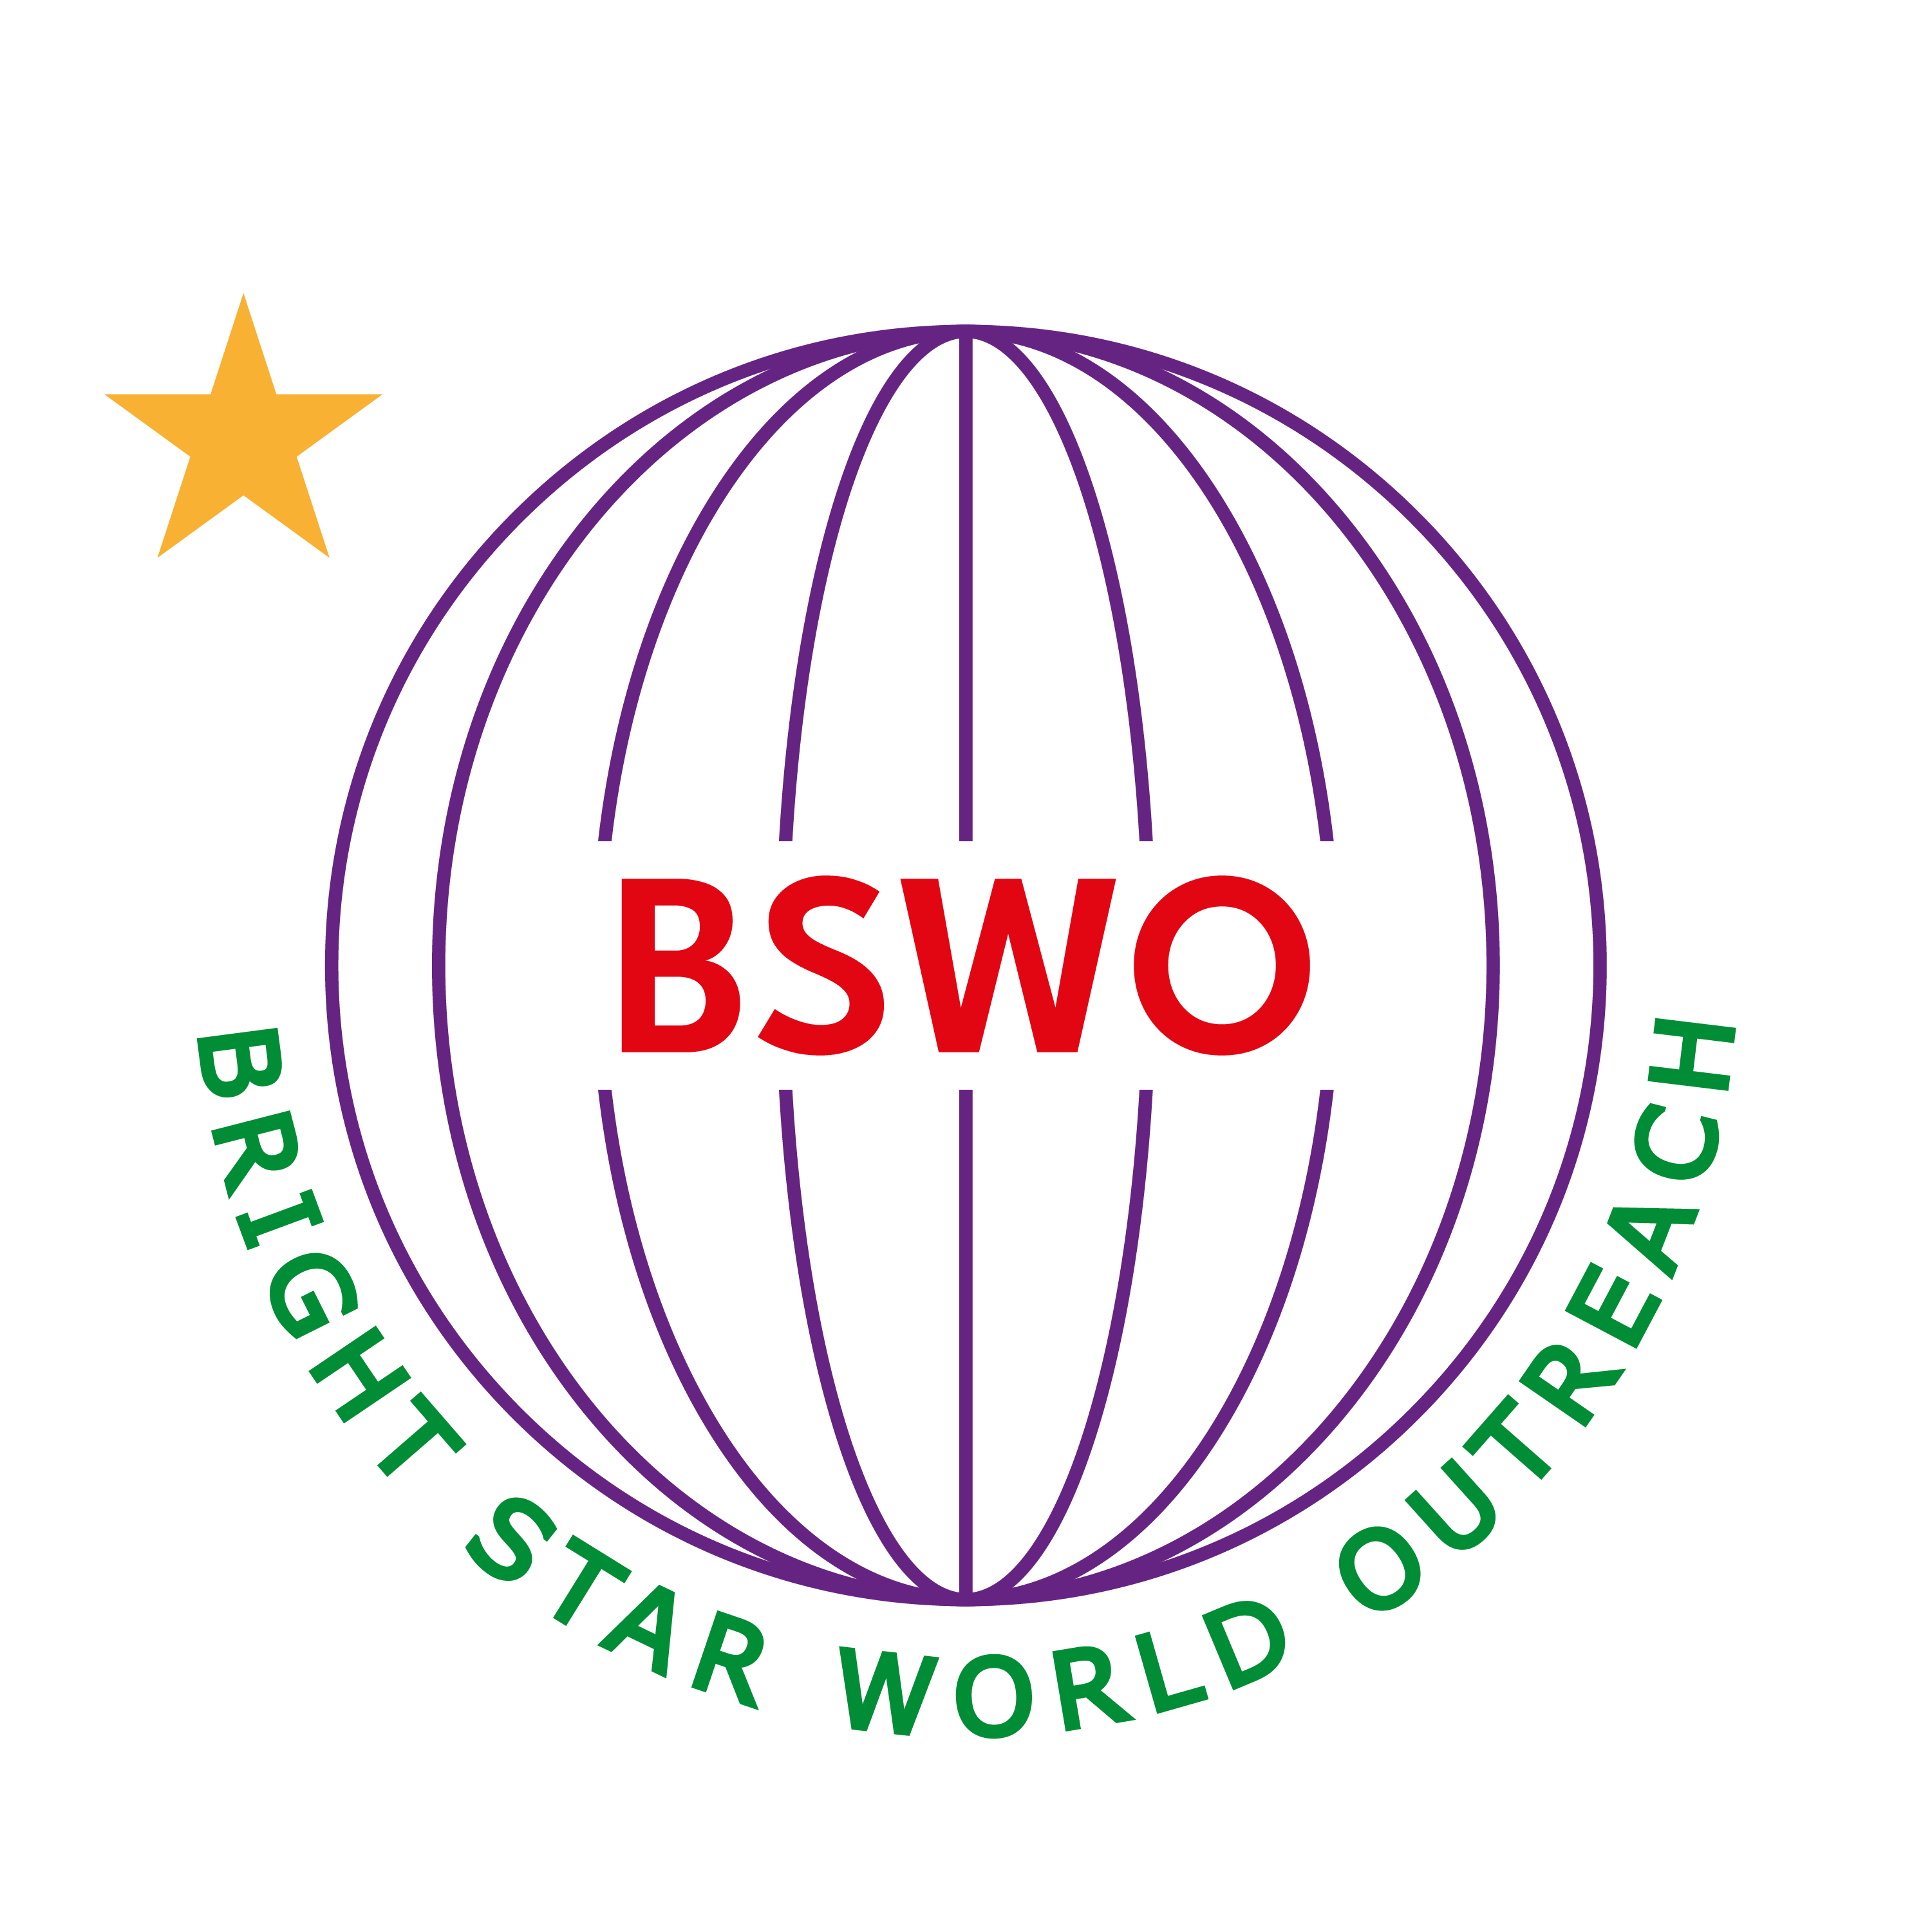 BSWO